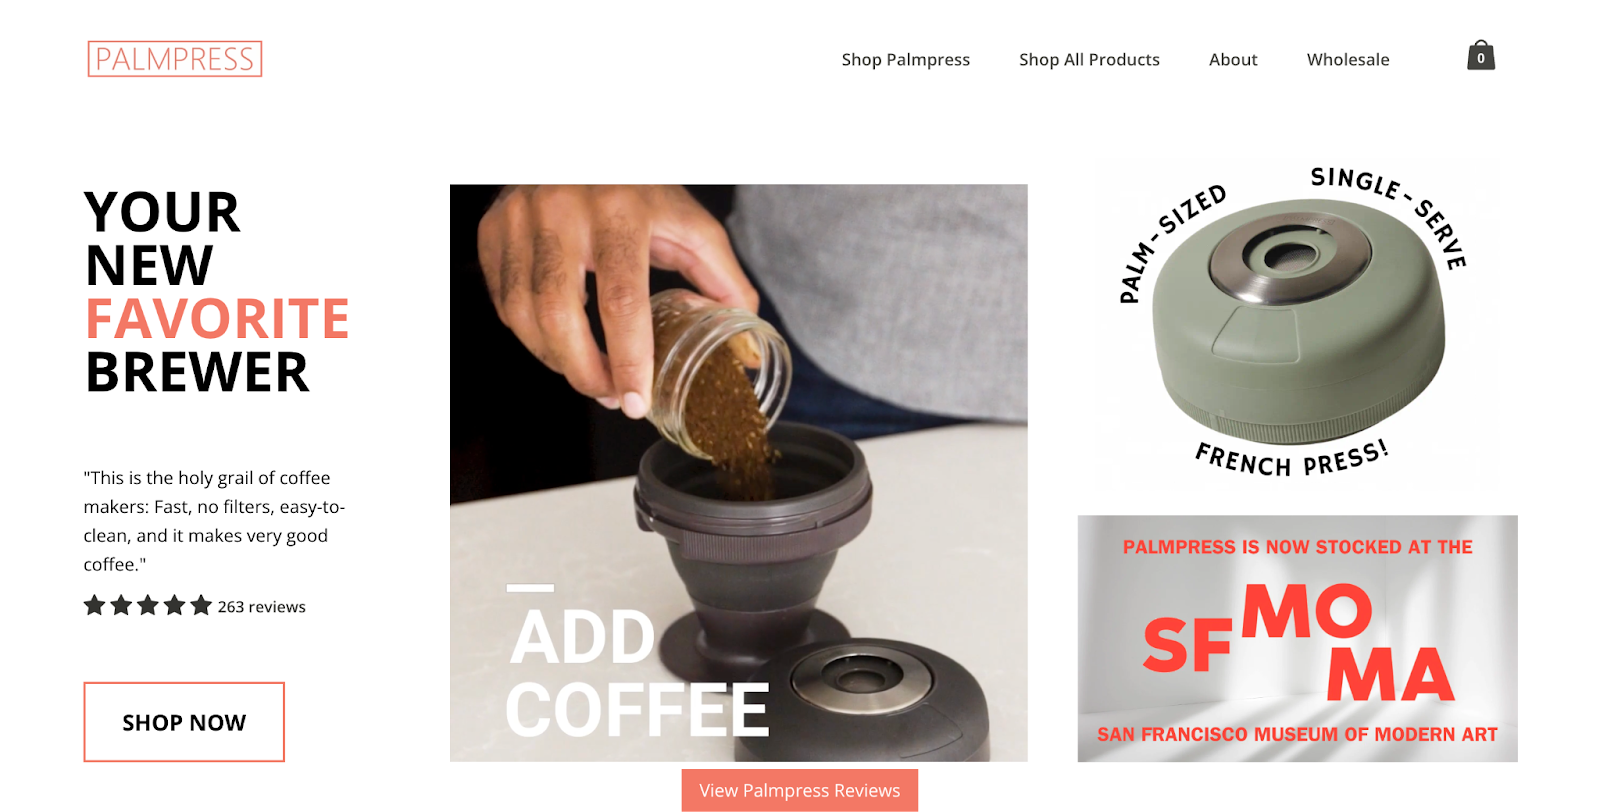 single product website example: Palmpress